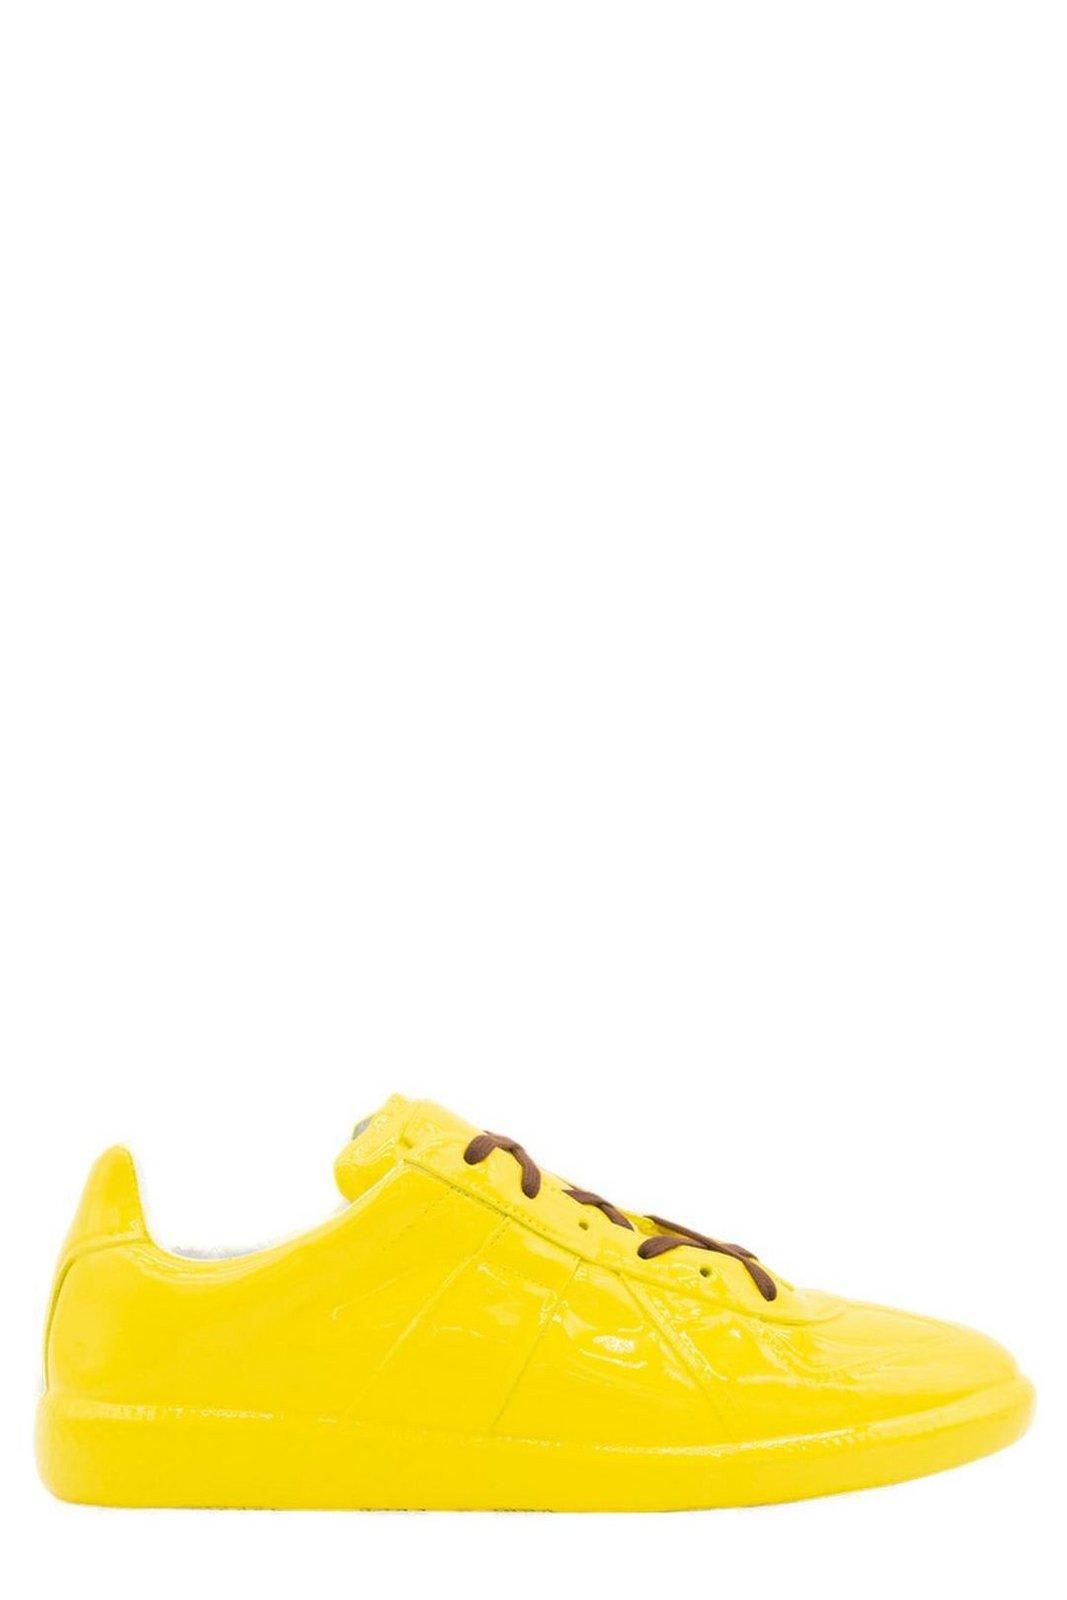 Maison Margiela Replica Lace-up Trainers In Yellow